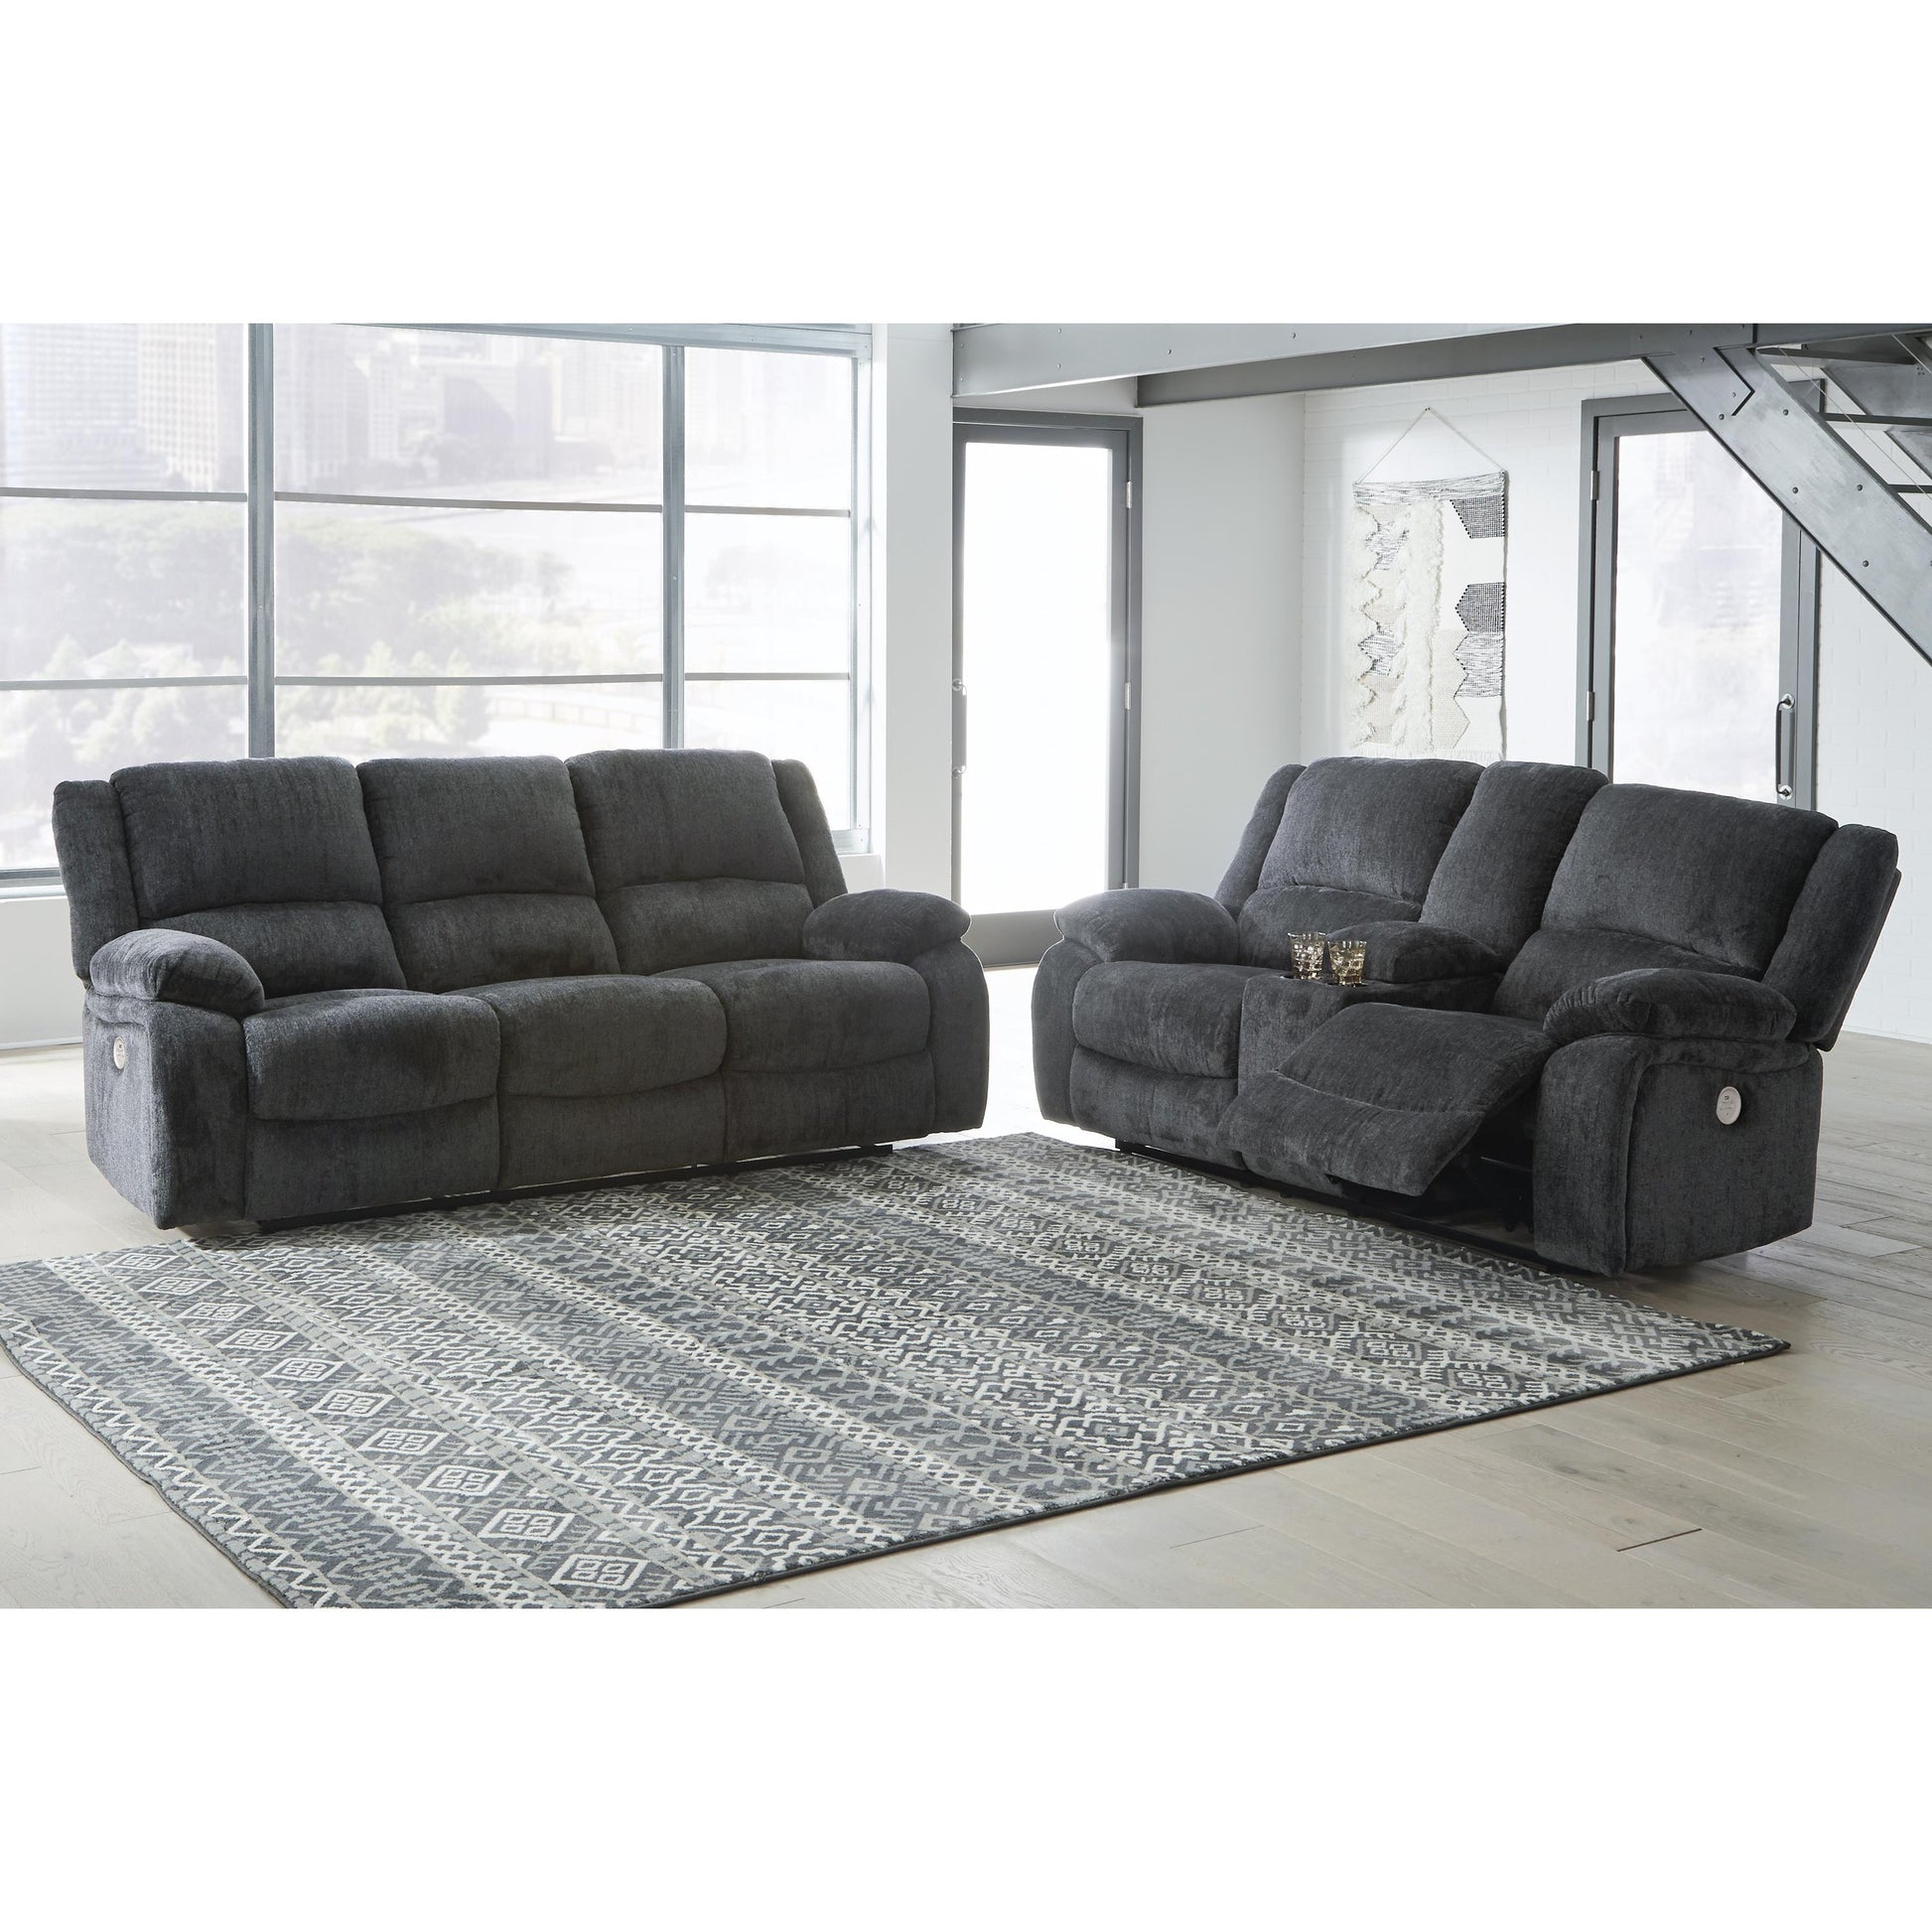 Signature Design by Ashley Draycoll Power Reclining Fabric Loveseat 7650496